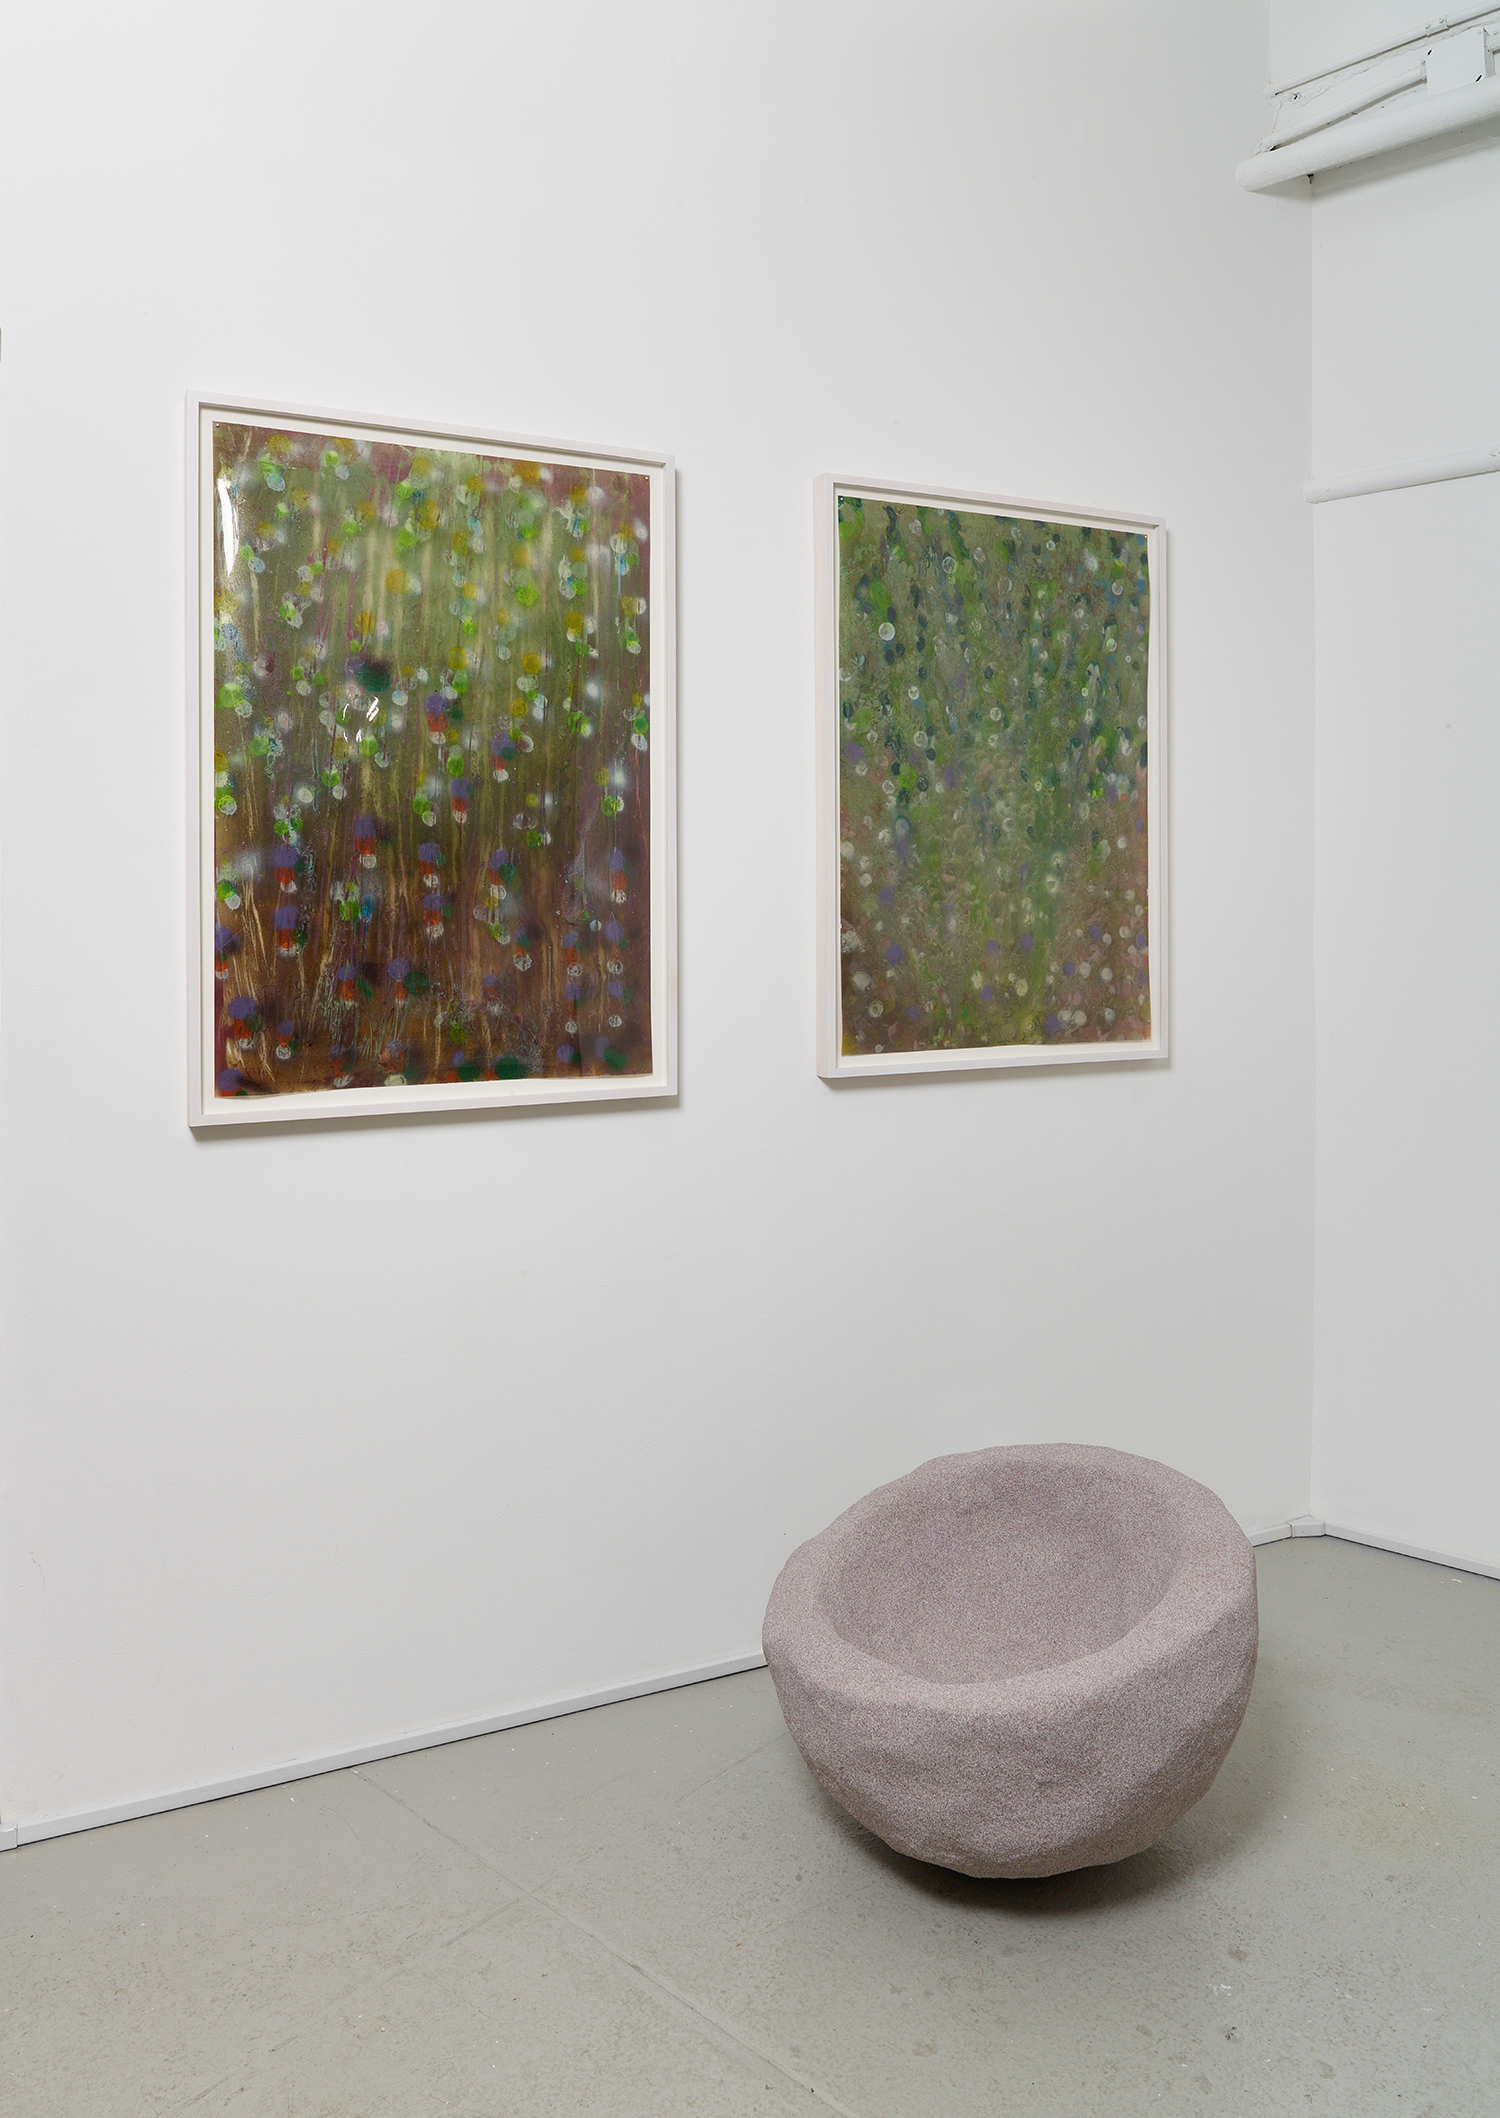 Installation view showing paintings on duralar by Giacinto Occhionero and sculptures by Rachel Higgins